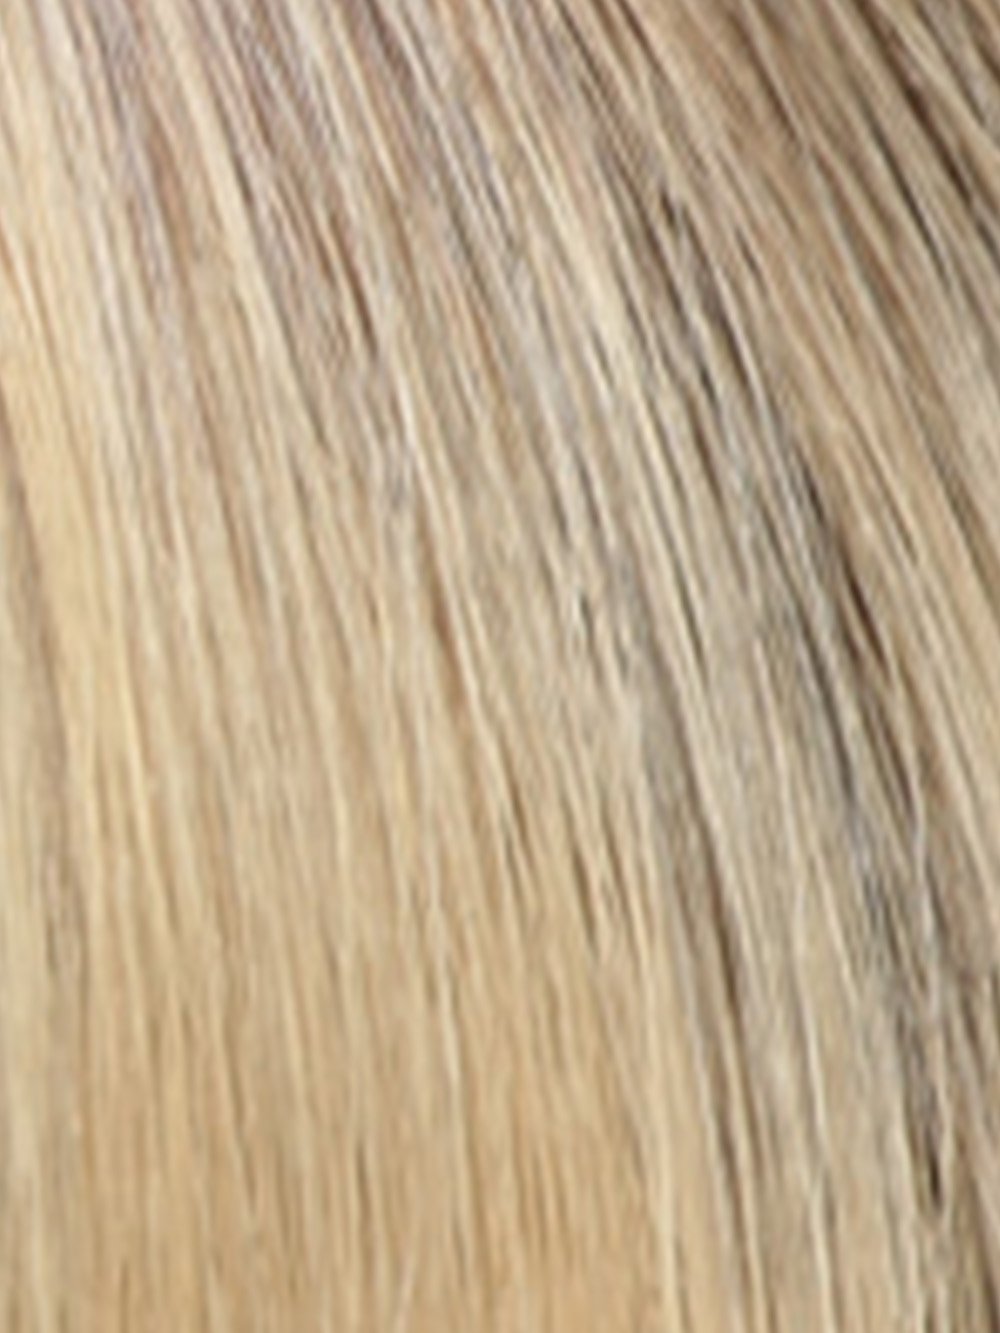 02-8 | Beige Blonde mixed with Off Black and Dark Roots